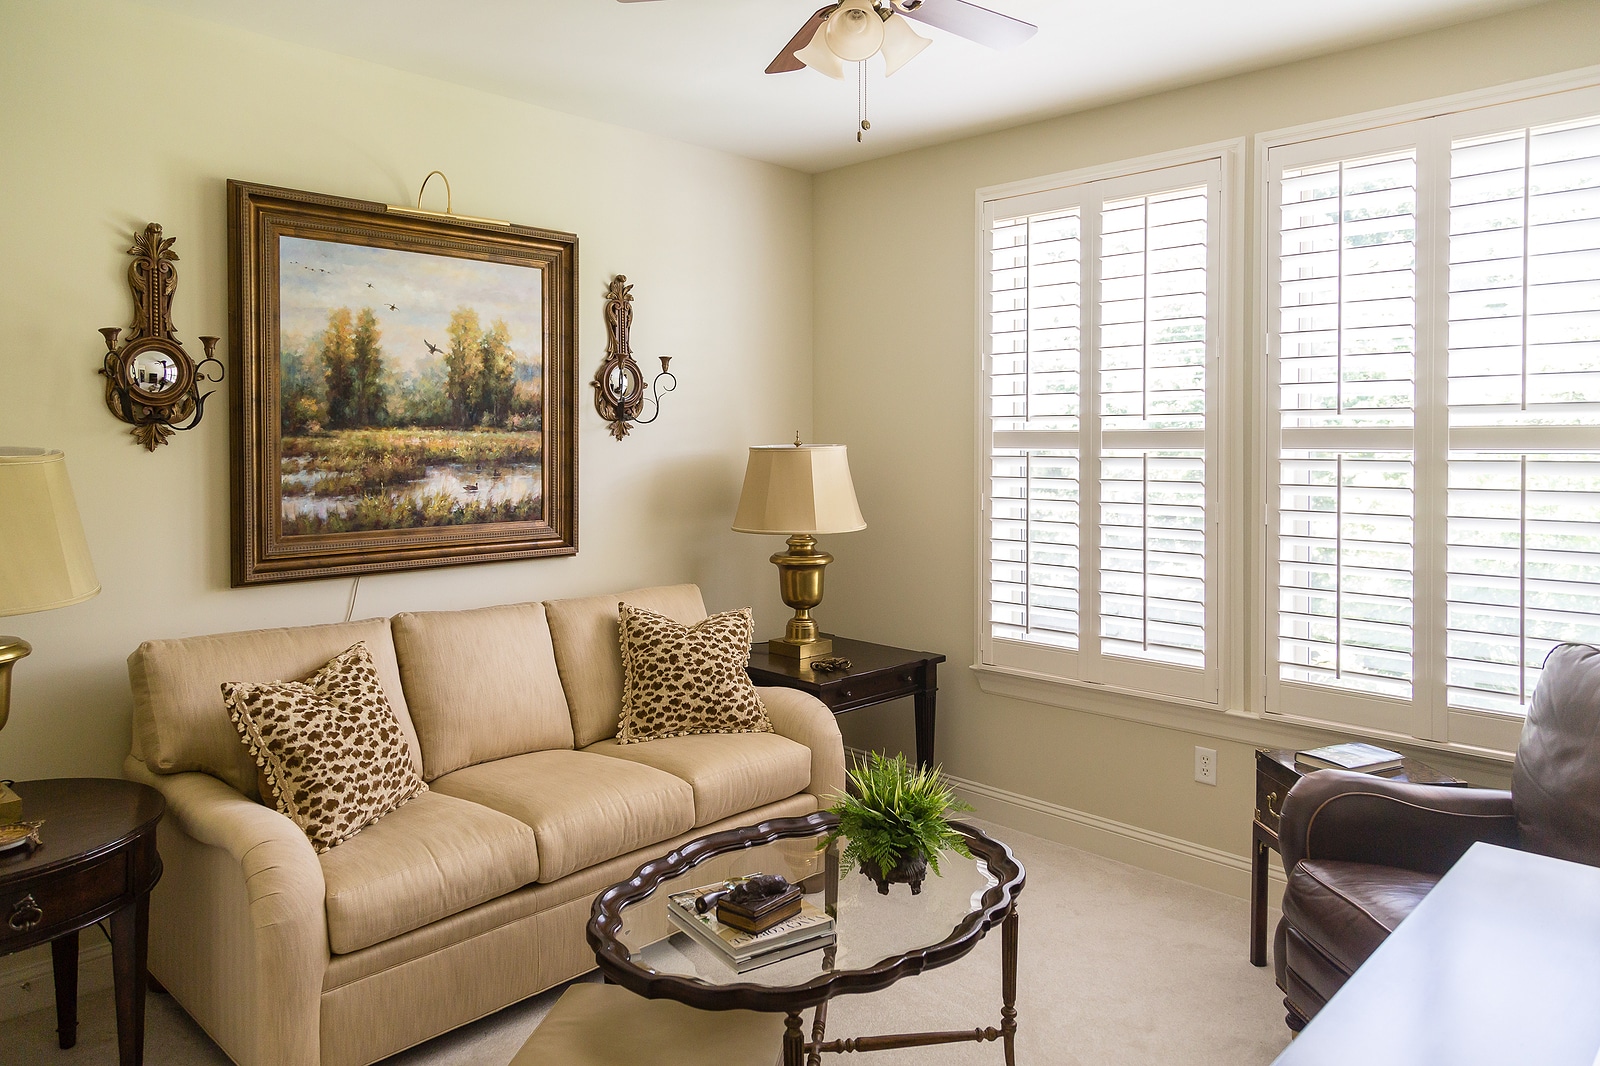 - ThermaStyle vs FauxWood Shutters: What's The Best Option For Home?